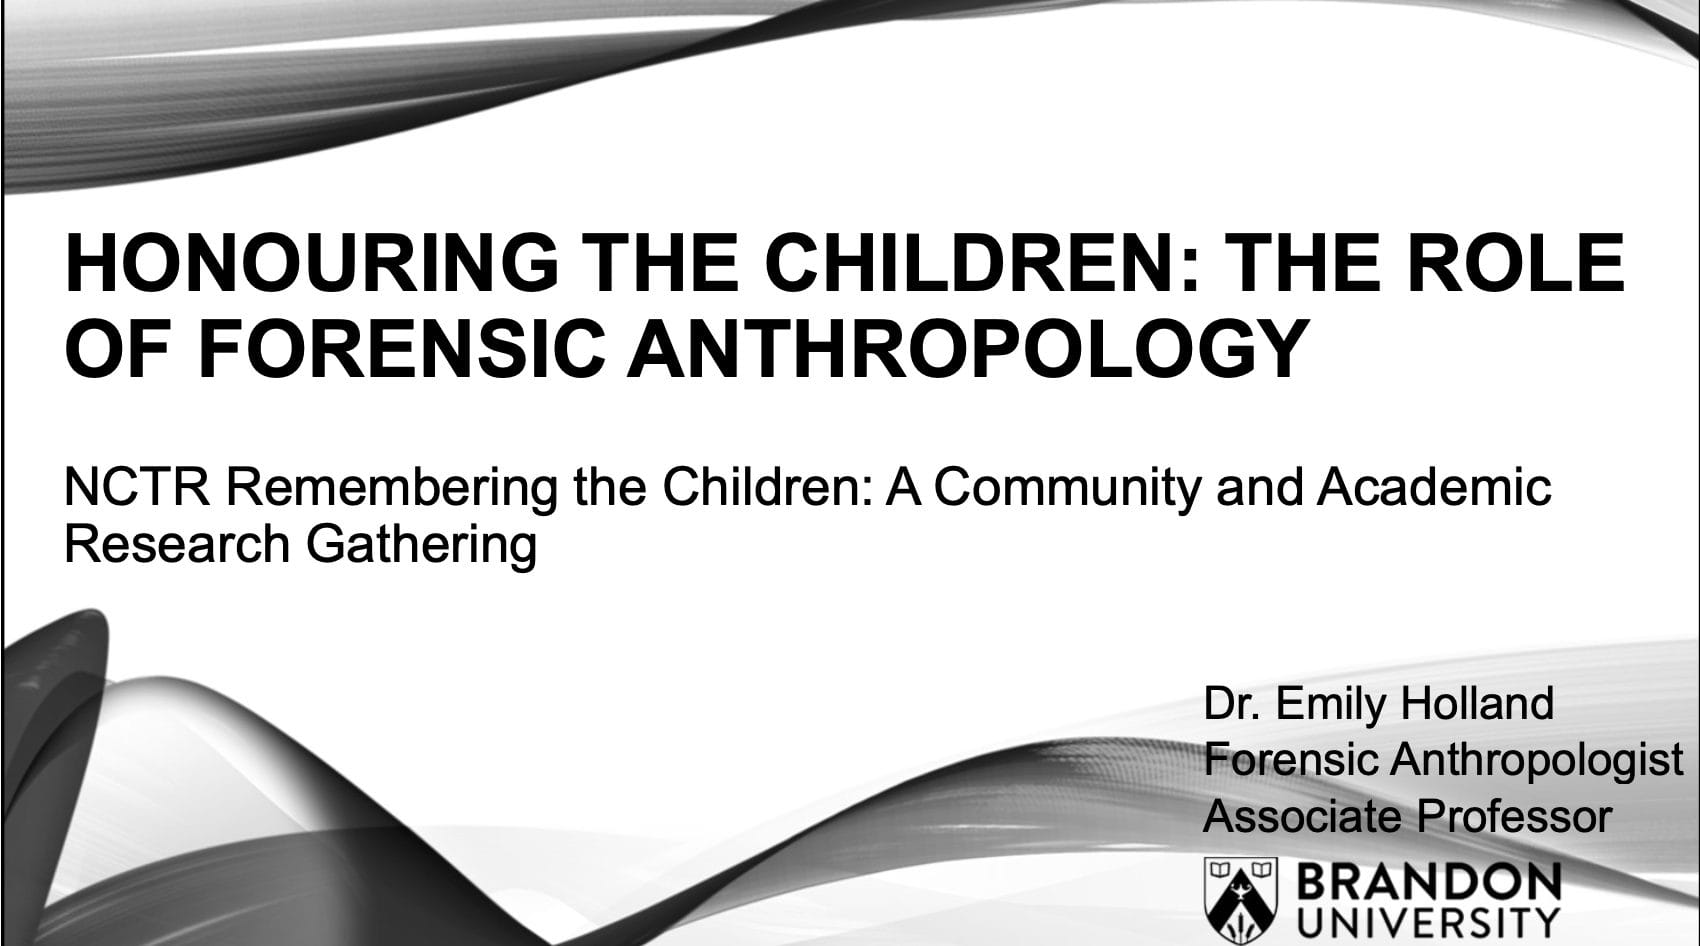 HONOURING THE CHILDREN: THE ROLE OF FORENSIC ANTHROPOLOGY